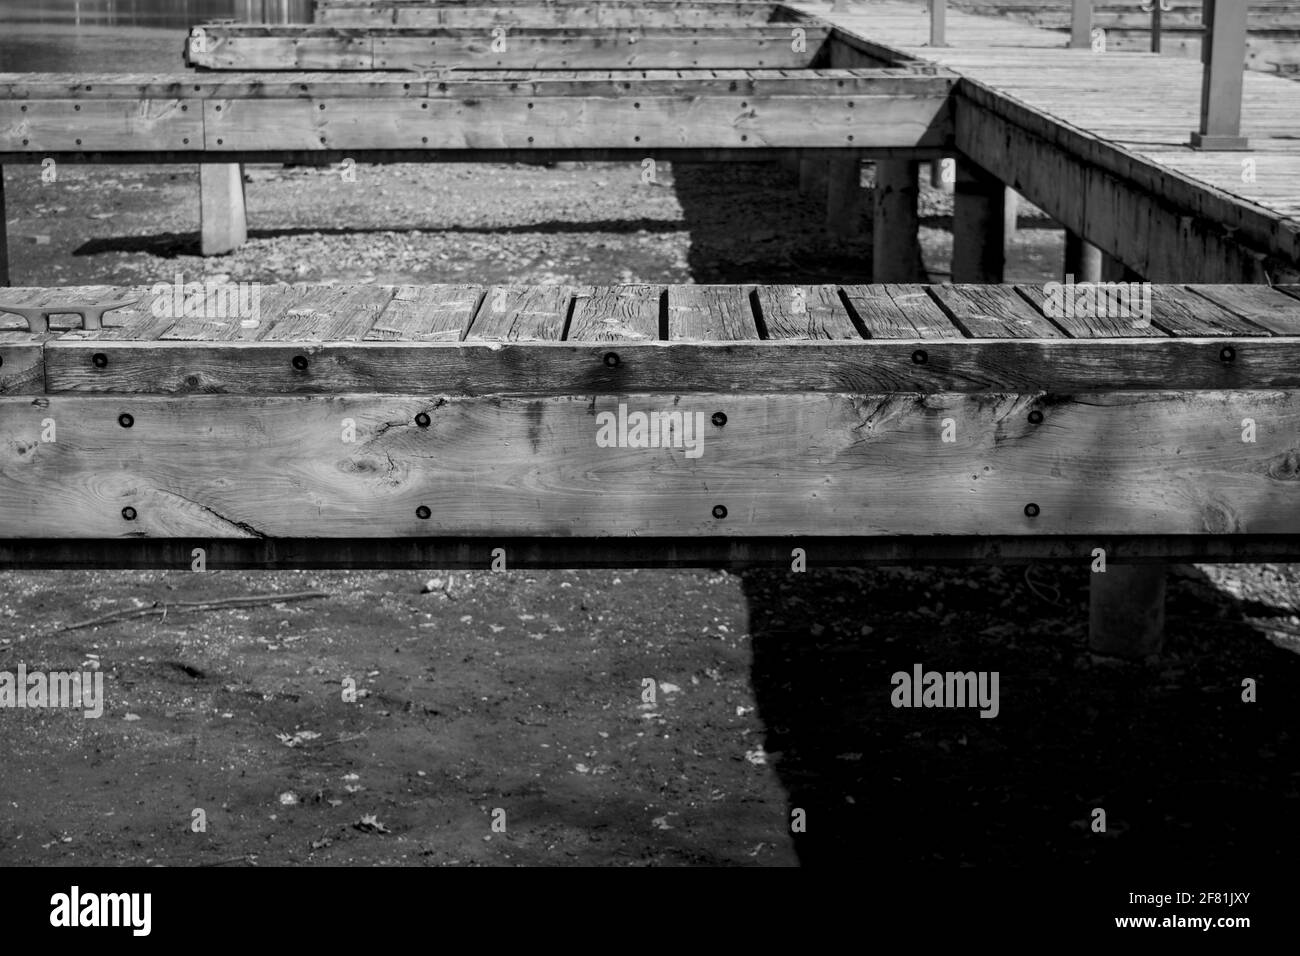 Black and white shot of the wooden boat dock with multiple berths at Dow's Lake Pavilion when the lake is emptied of water in winter. Ottawa, Ontario. Stock Photo